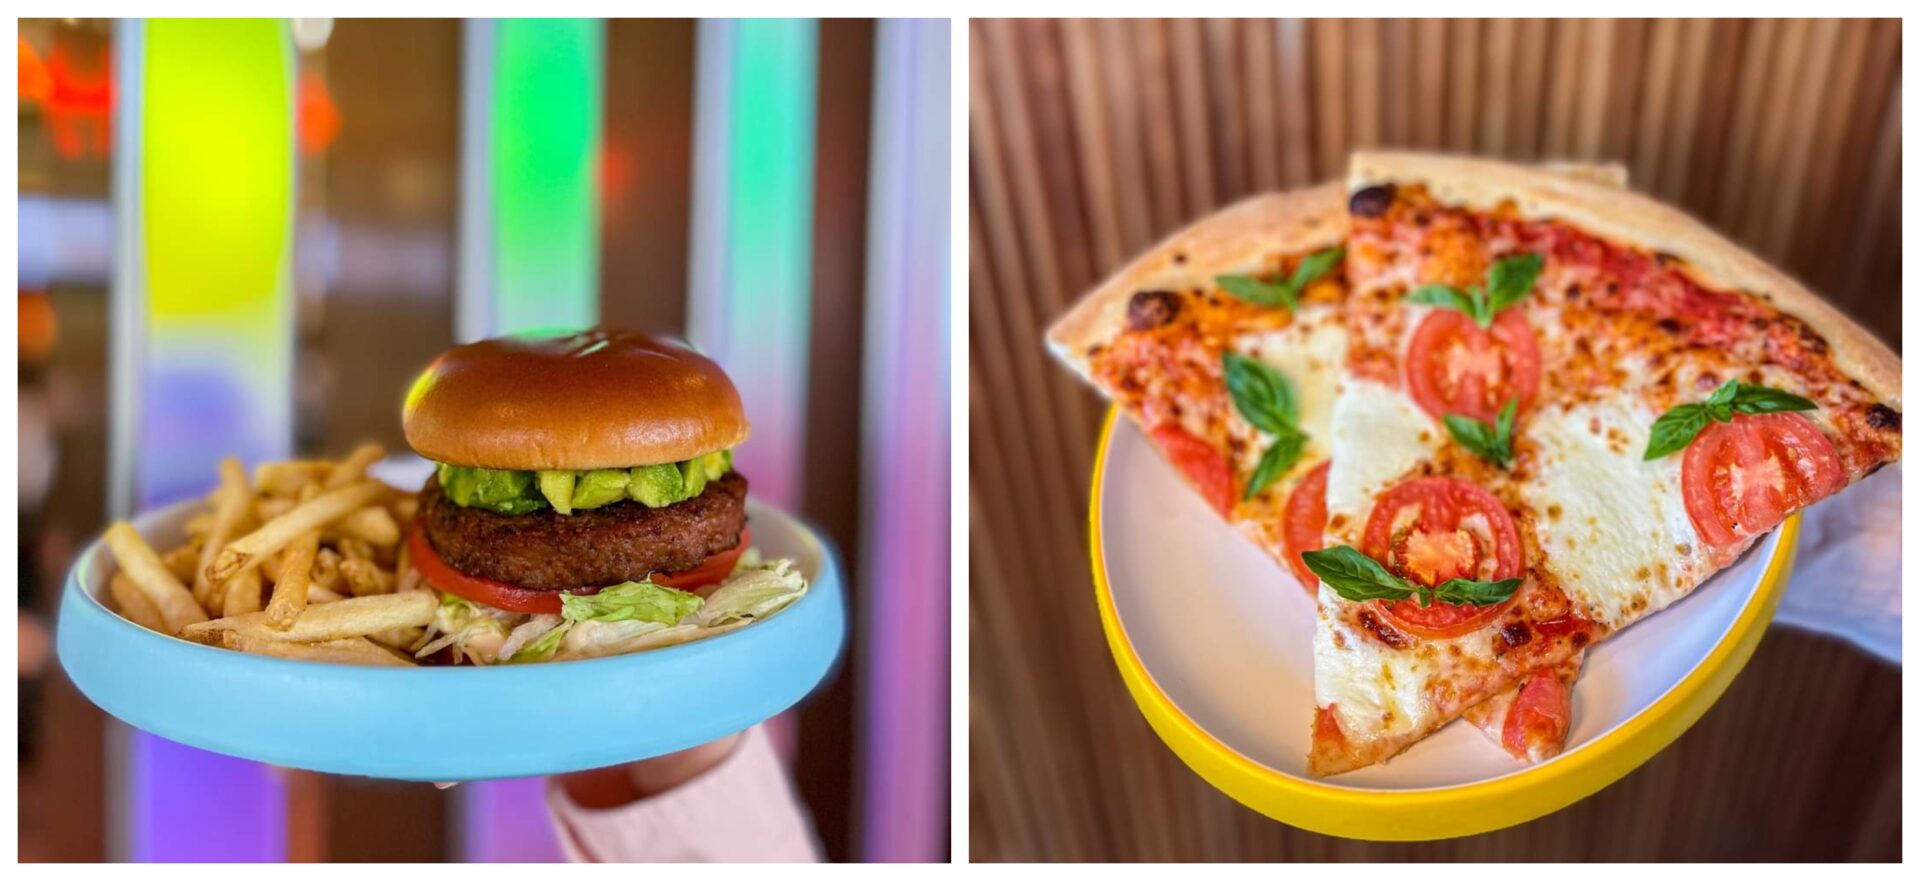 New Food Items at Connections Café & Eatery in EPCOT